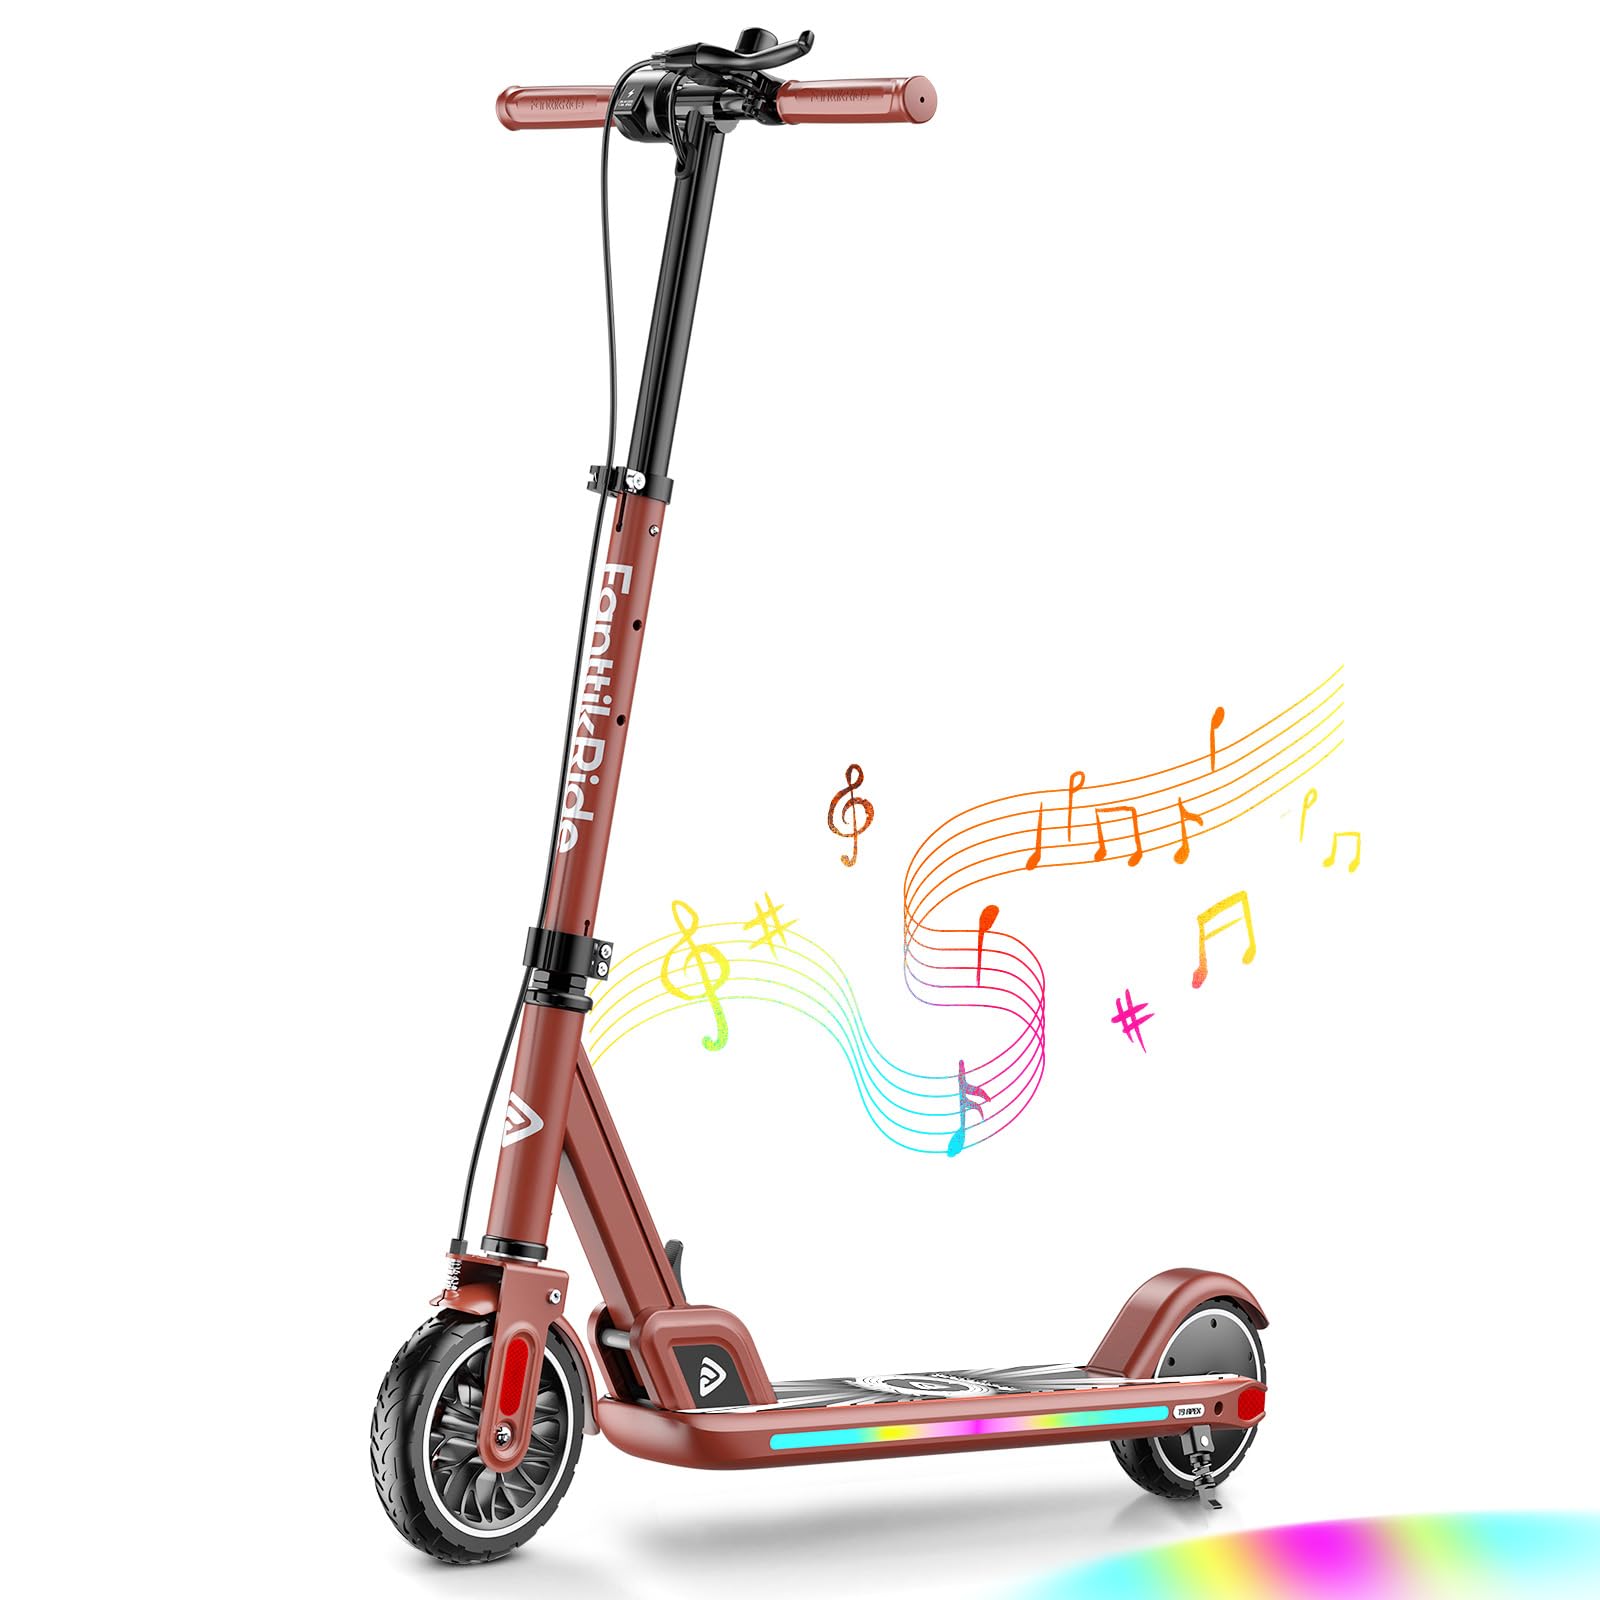 Antique red FanttikRide T9 Apex electric scooter for teens with musical notes emanating from the side, highlighting built-in speaker or music mode feature.